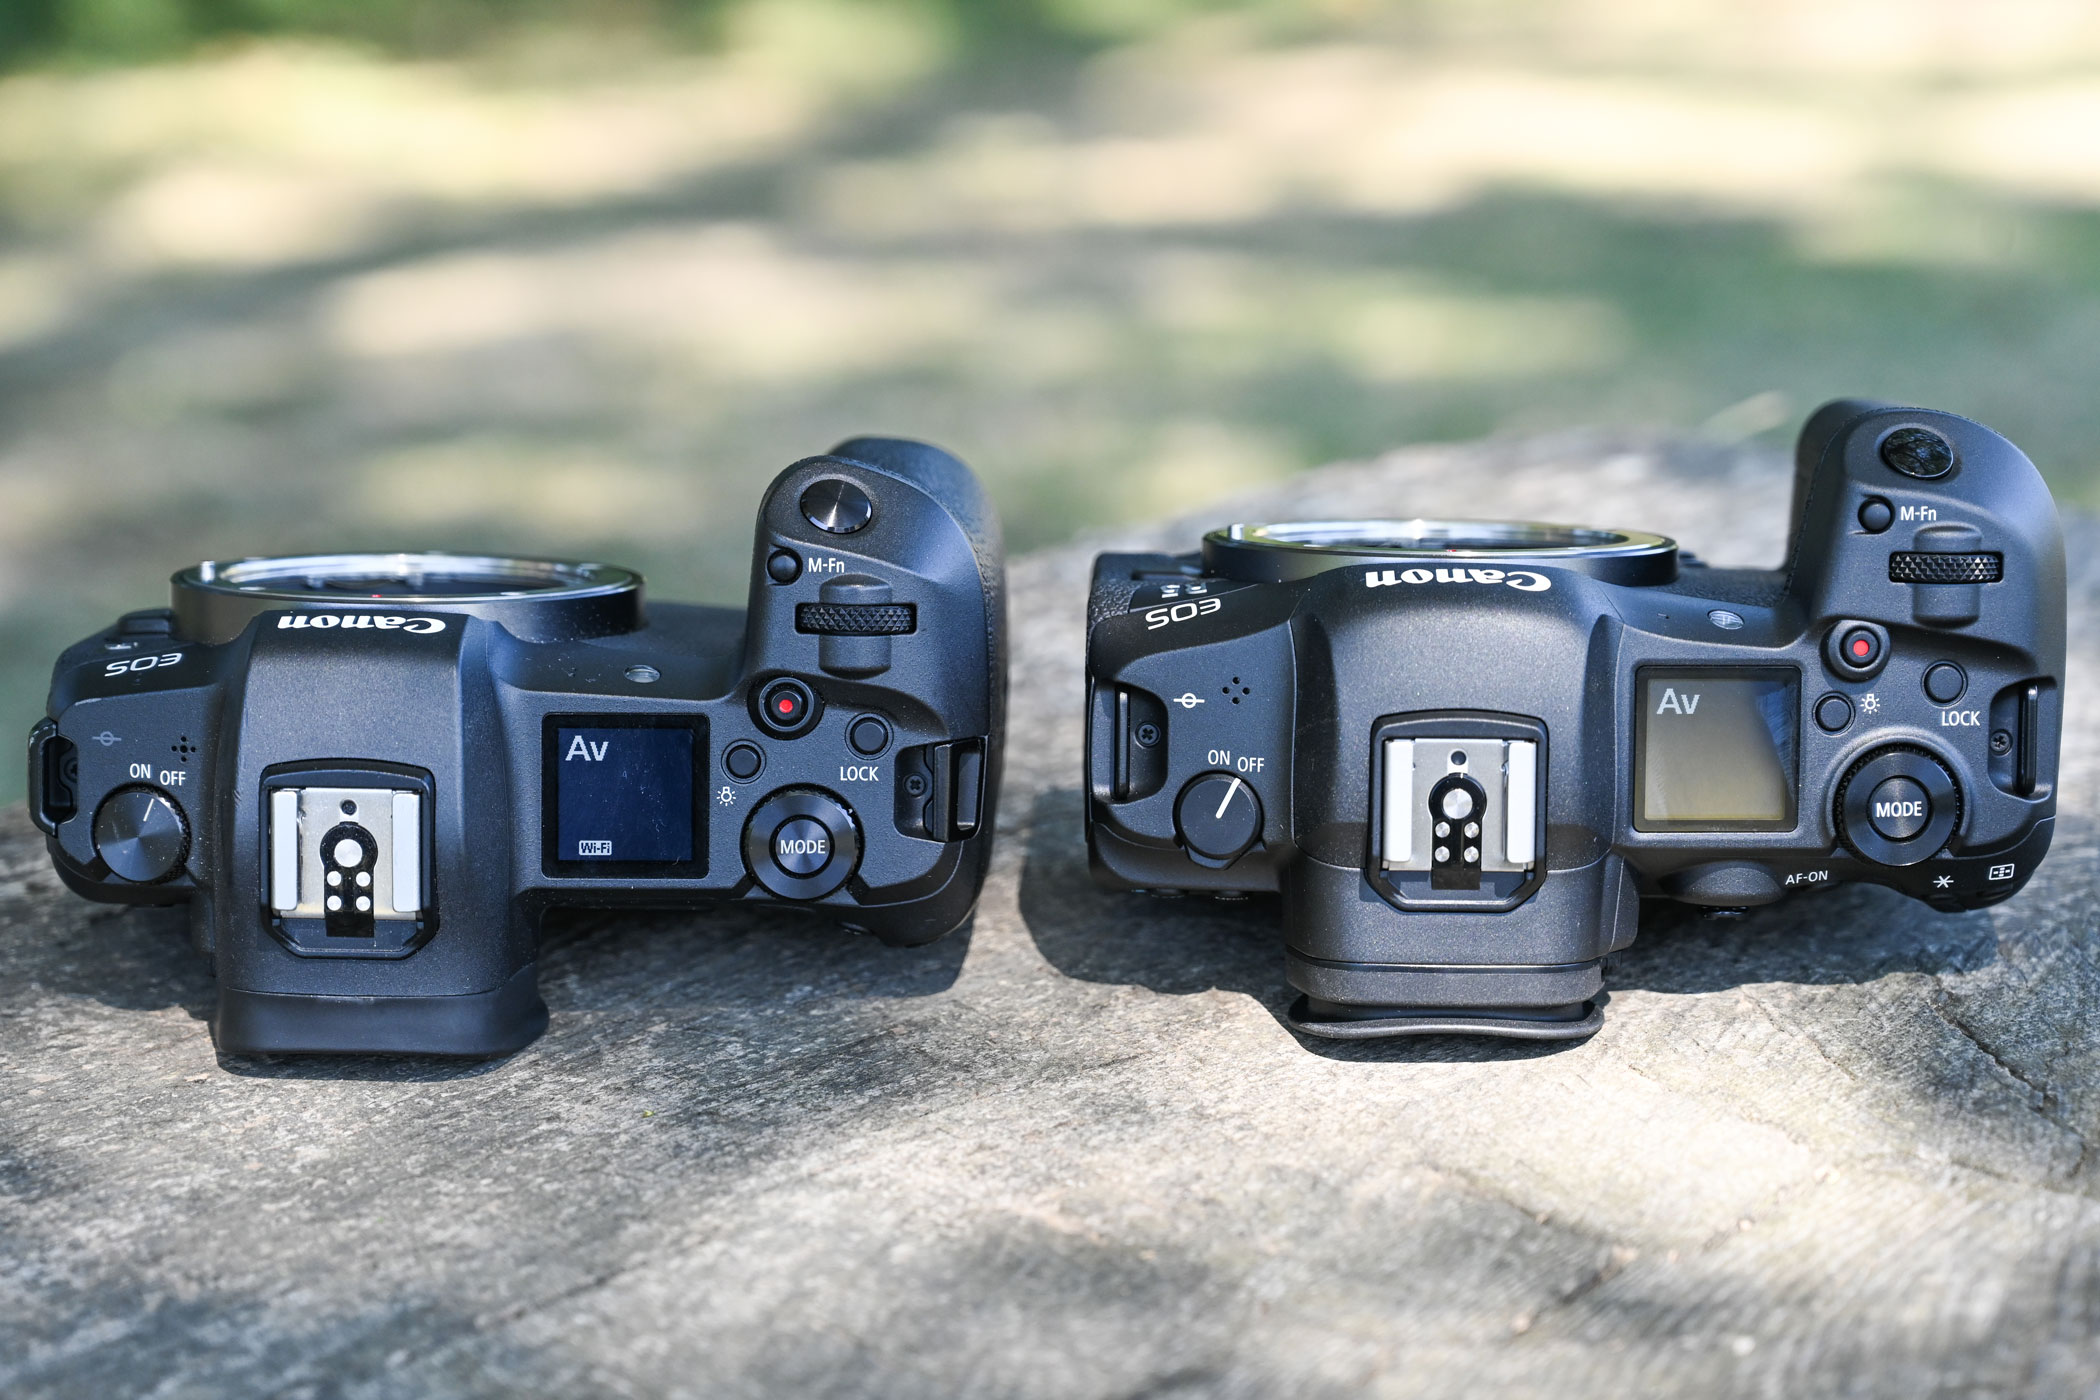 The R5 is thicker than the EOS R to accommodate the IBIS unit, but its top-plate control layout is identical